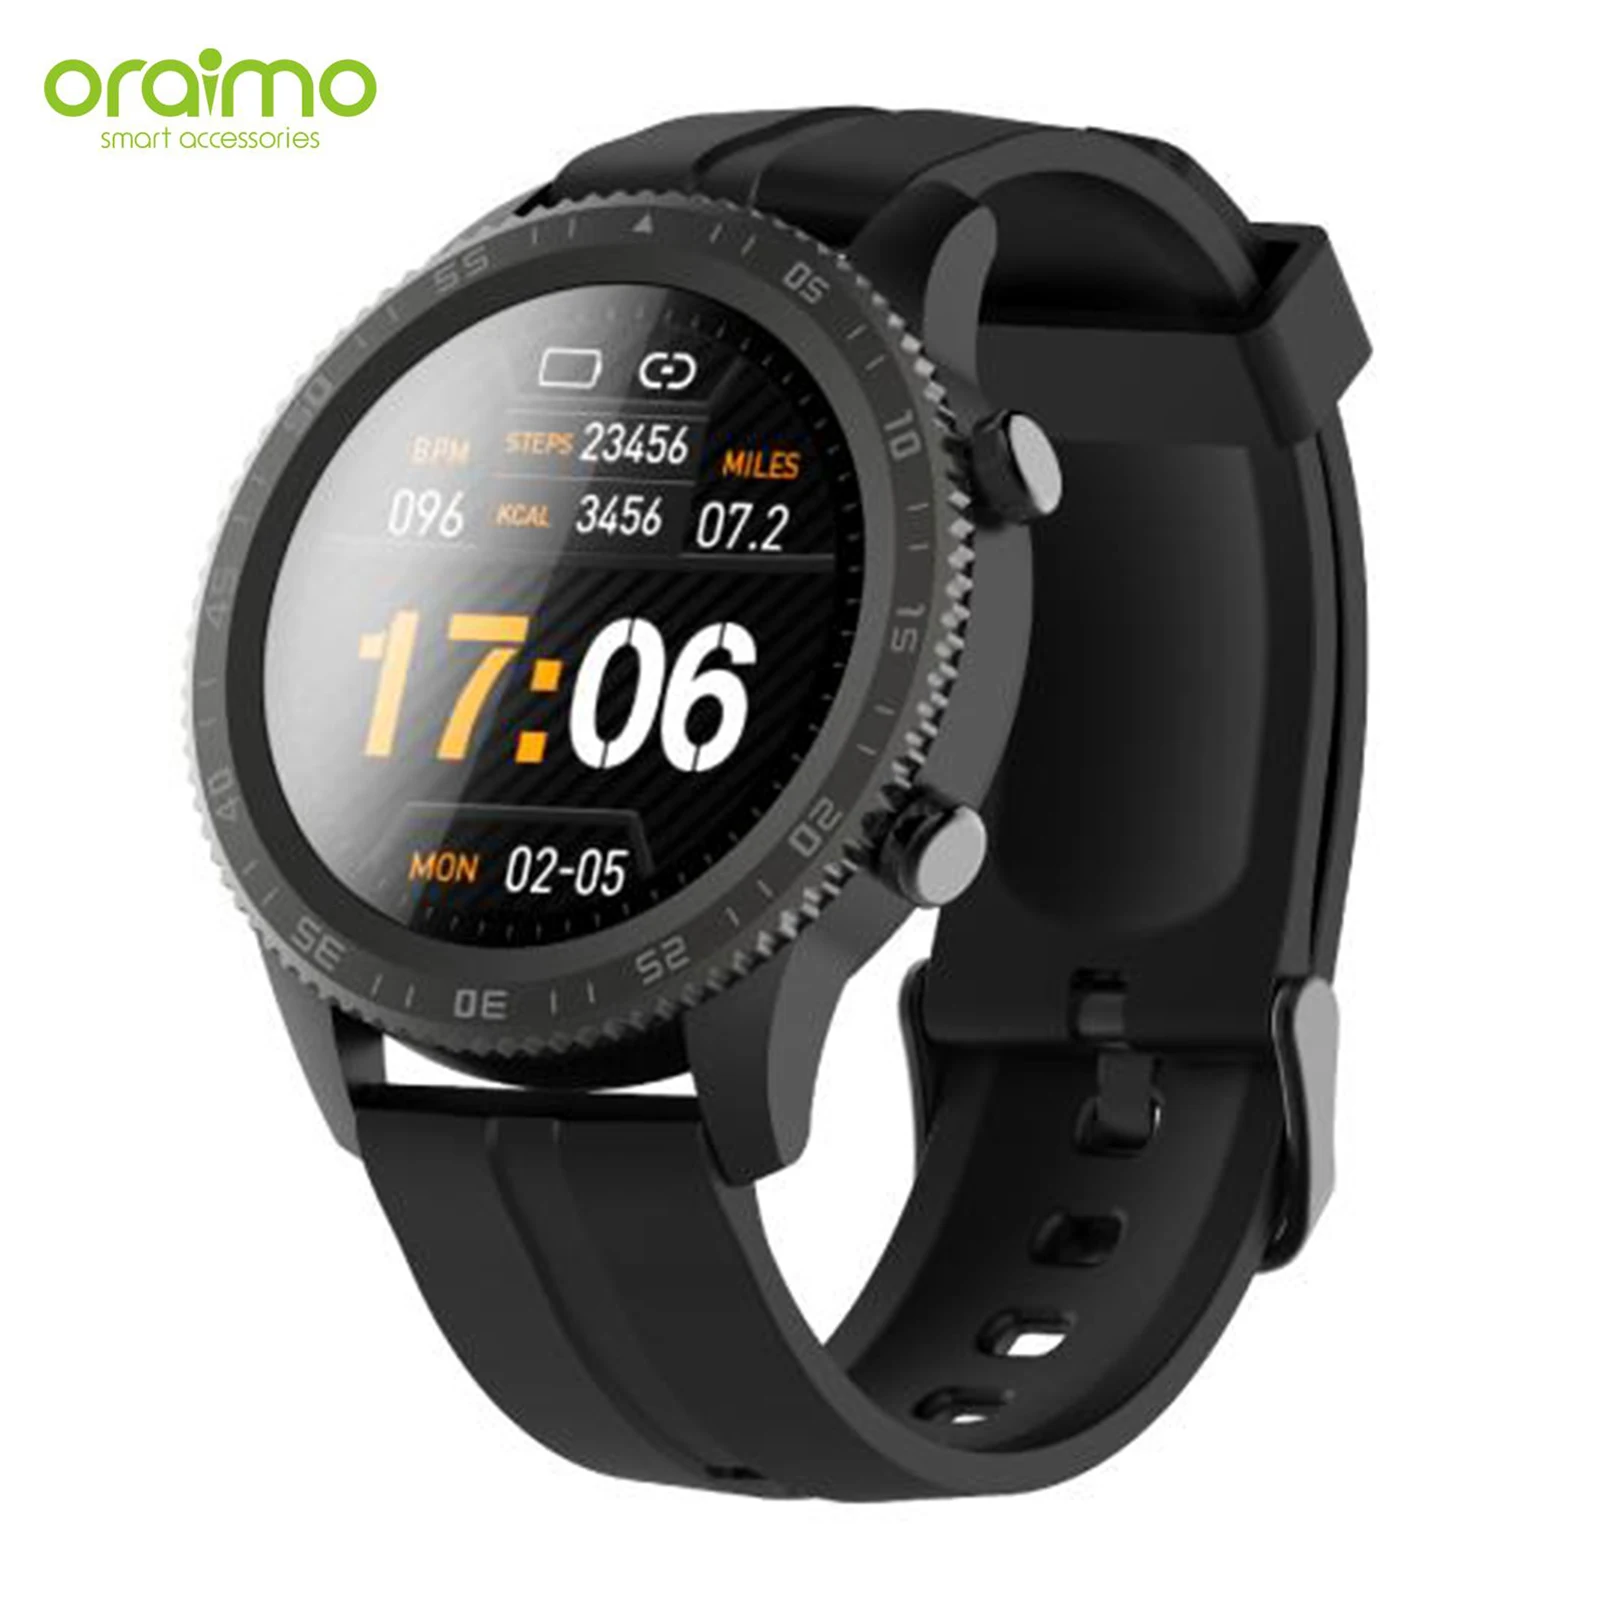 

Oraimo Tempo W3 Smart Watch OSW-22N IP68 Waterproof Fitness Tracker Heart Rate Sleep Monitor 13 Sports Modes 20-day Battery Life